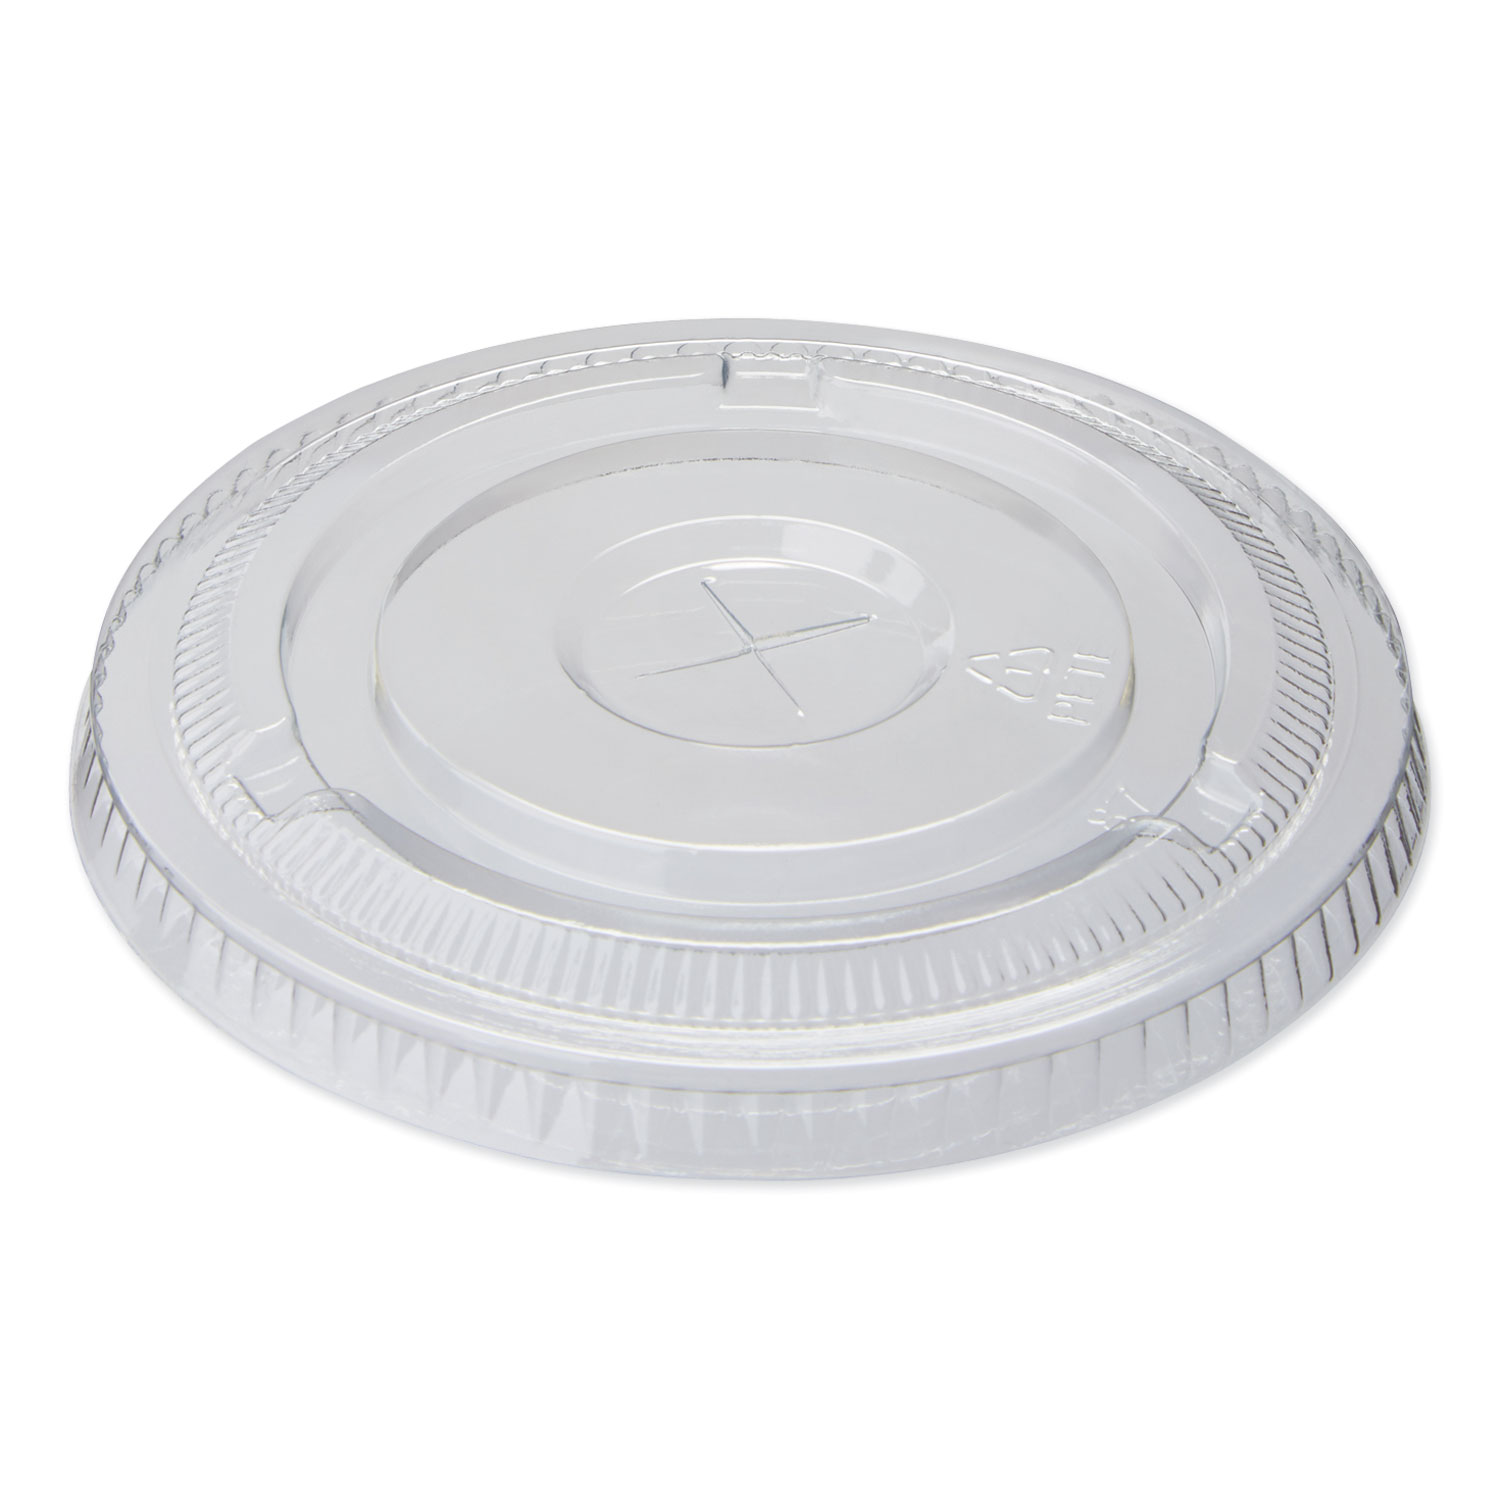  Dixie CL1424PET Cold Drink Cup Lids, Fits 16 oz Plastic Cold Cups, Clear, 100/Sleeve, 10 Sleeves/Carton (DXECL1424PET) 